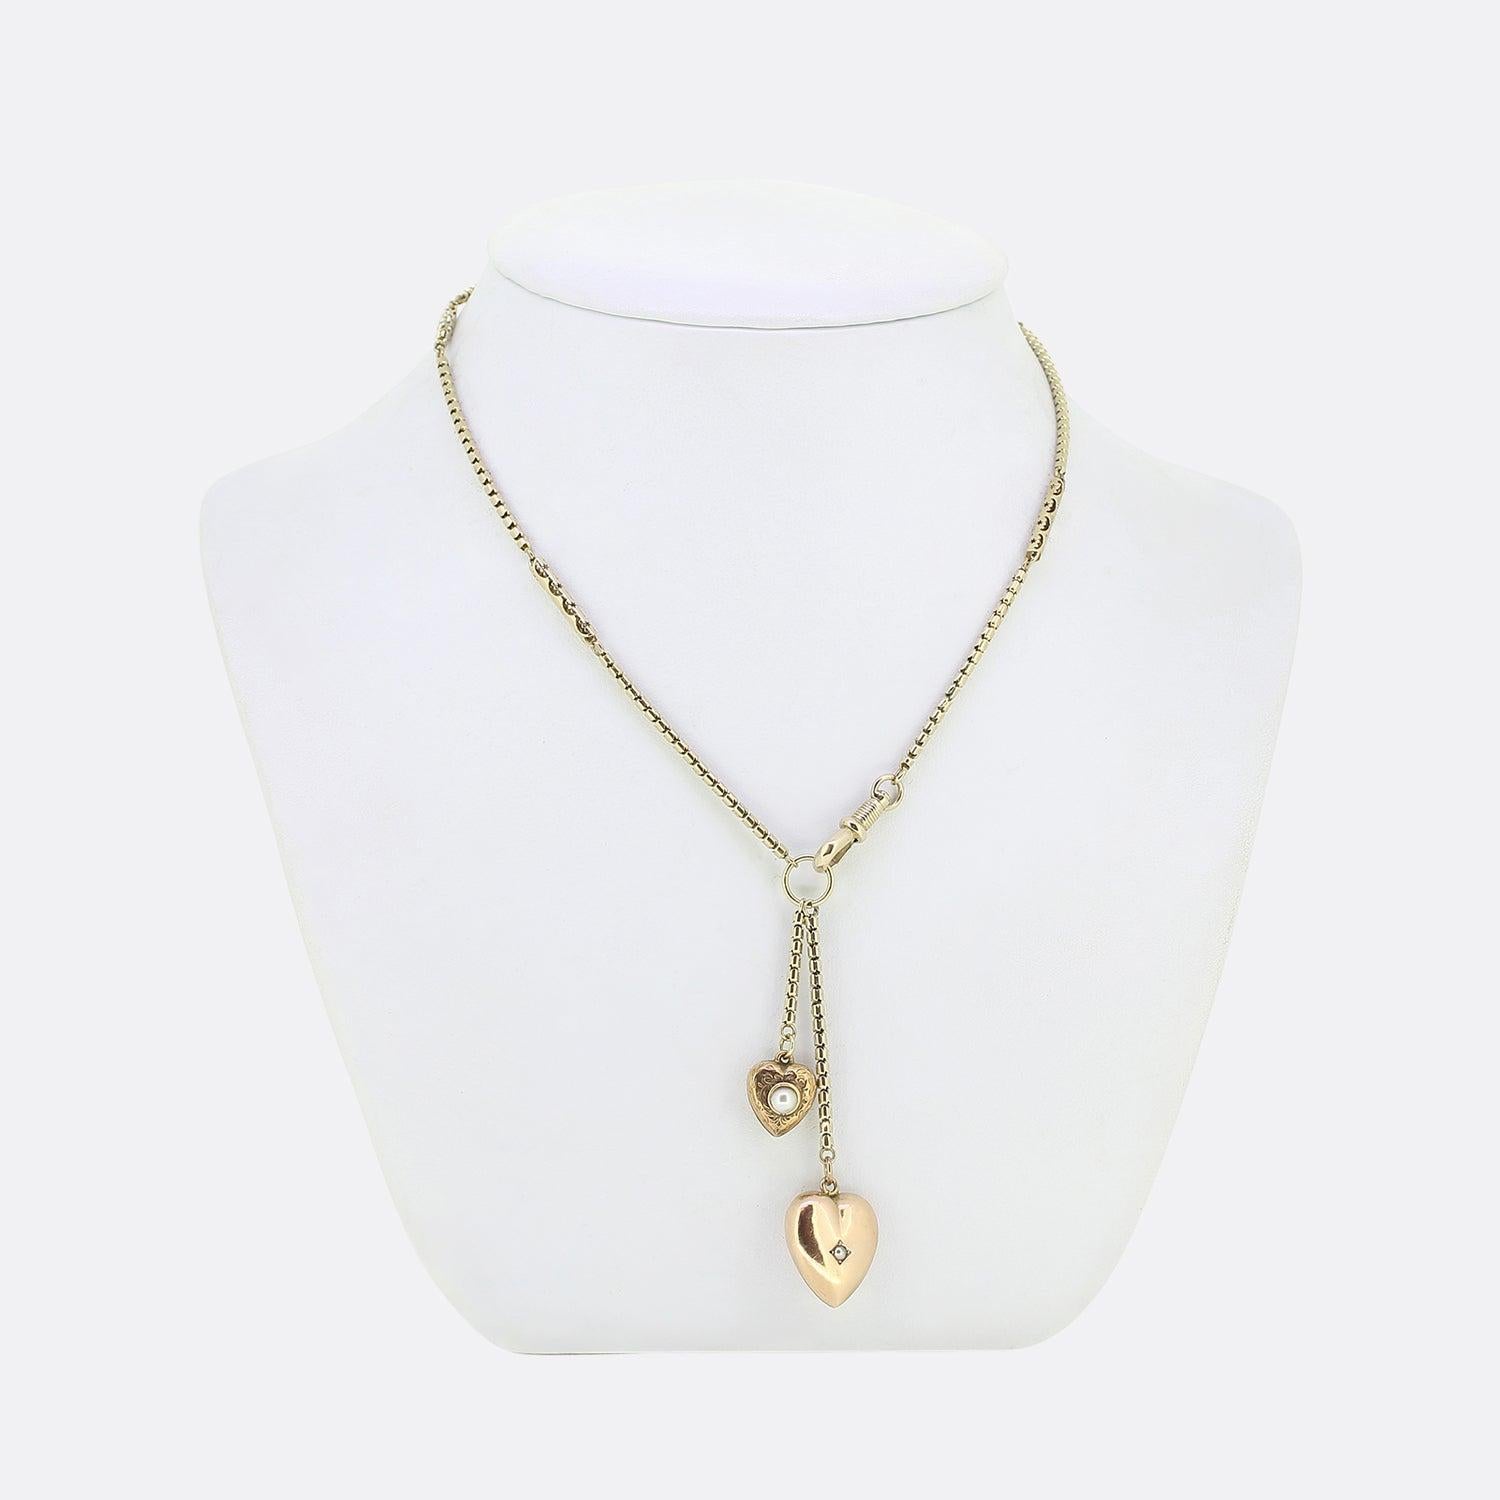 Here we have a vintage 9ct yellow gold charm necklace. An antique boxed chain with ornate pierced work plays host to two freely hanging love heart pendants below. The largest of which showcases a plain polished finish with a single seed pearl to the